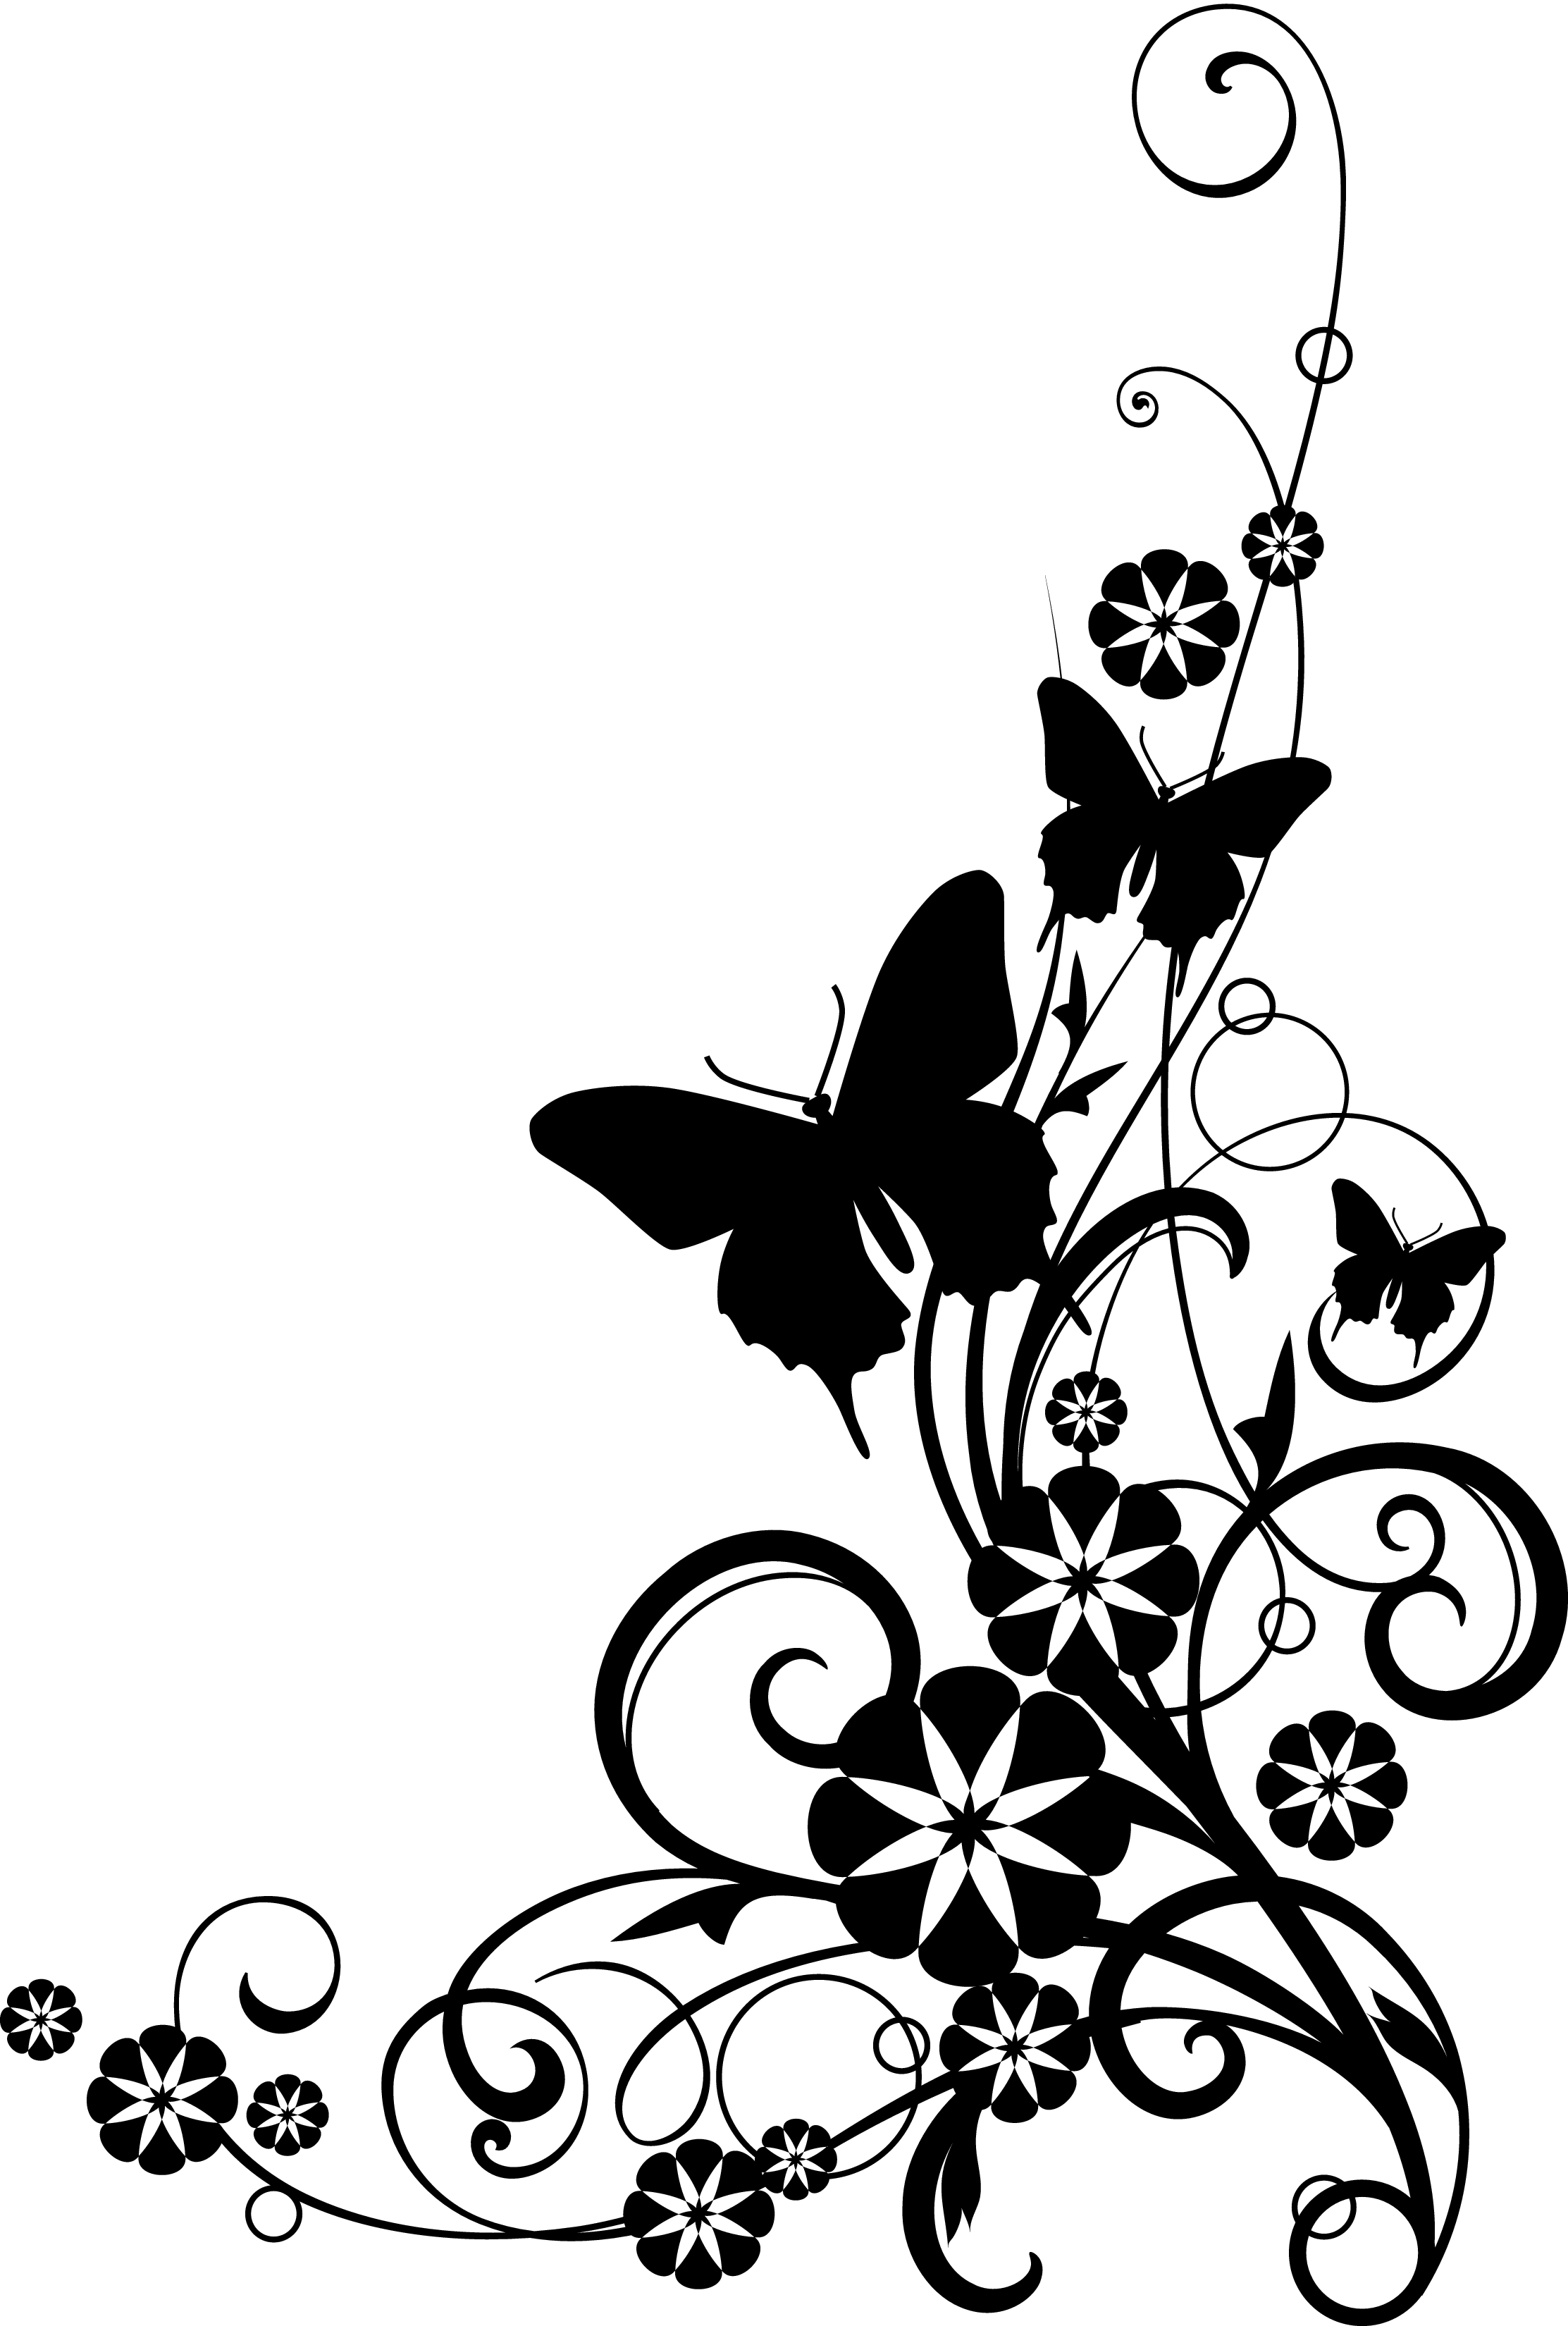 Cross And Flowers Clipart Black And White | Clipart Panda - Free ...